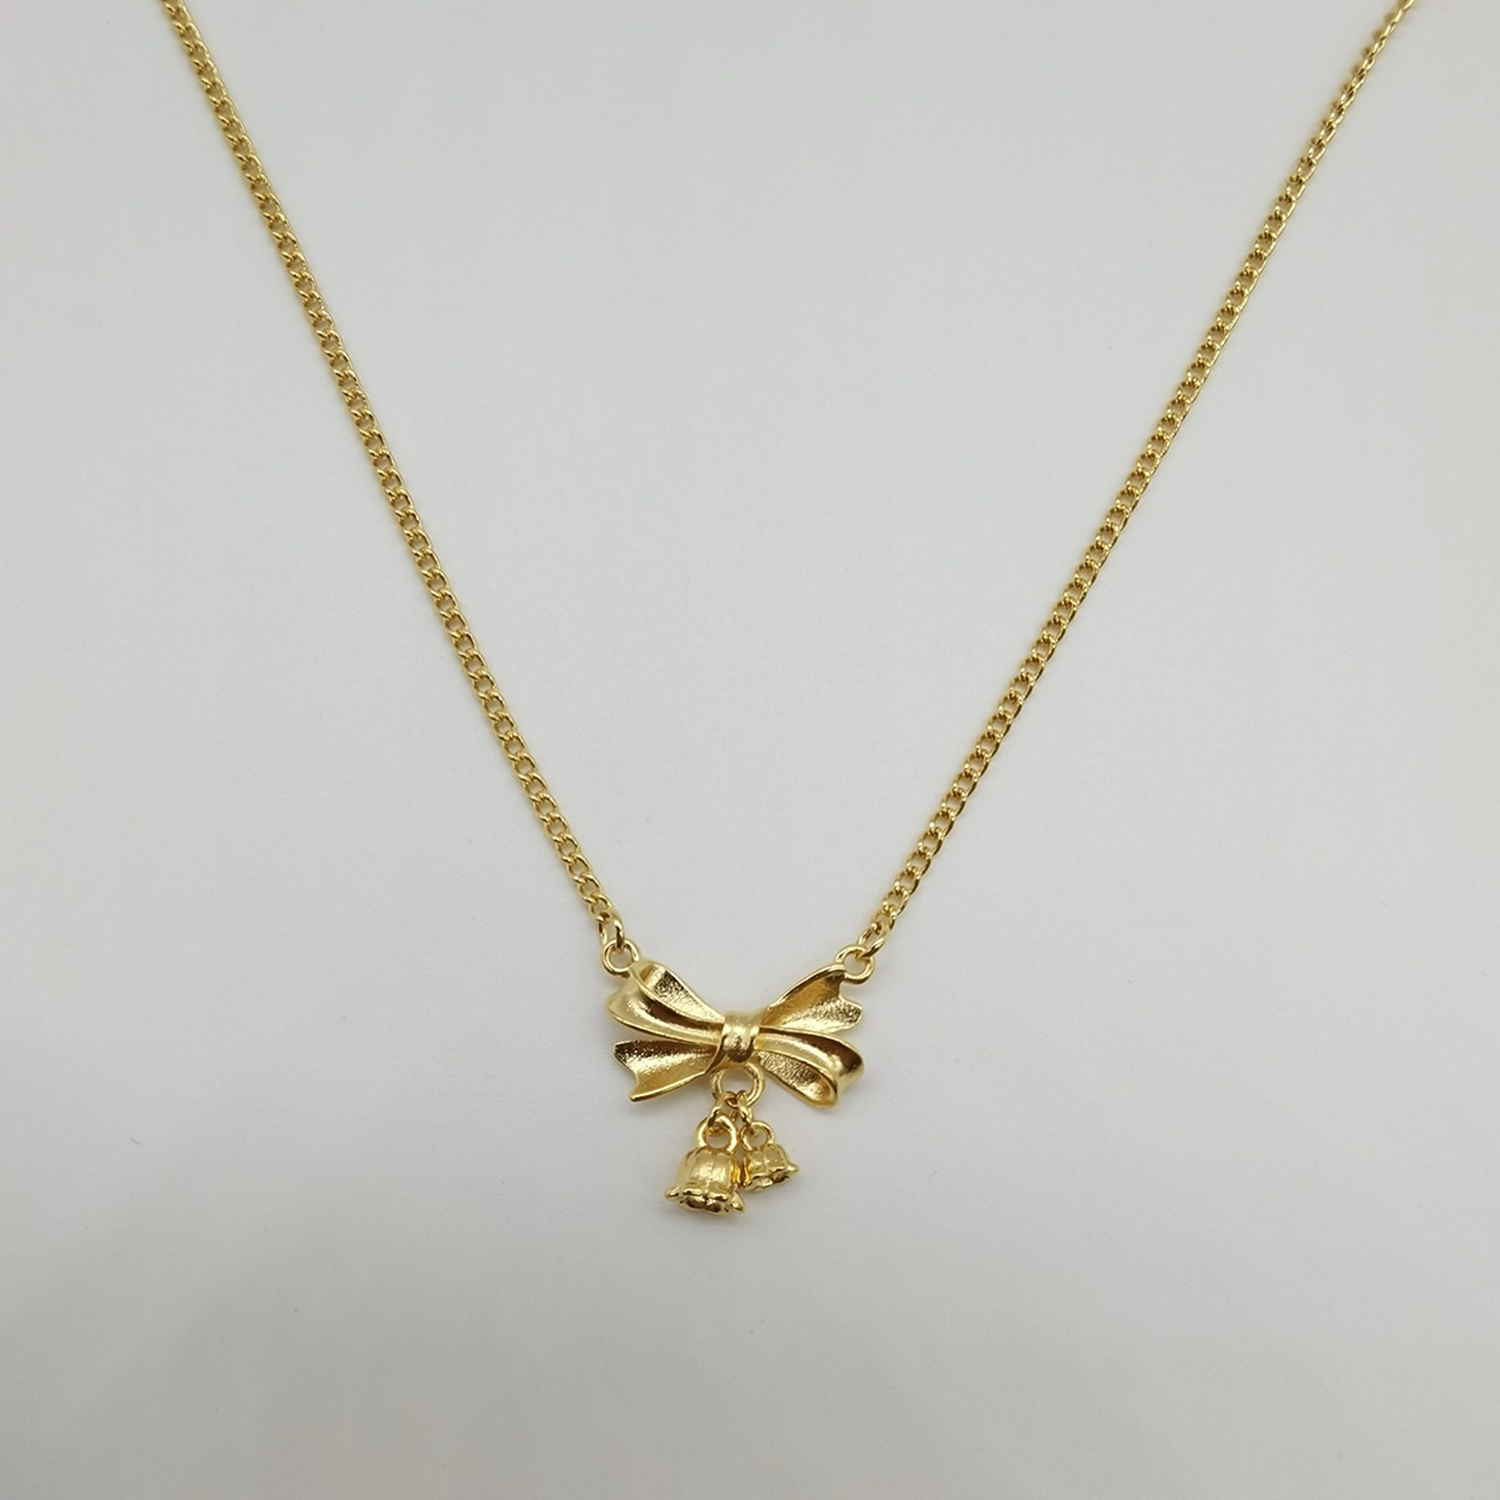 Alluvial gold vacuum electroplating 24K gold lily of the valley bow necklace